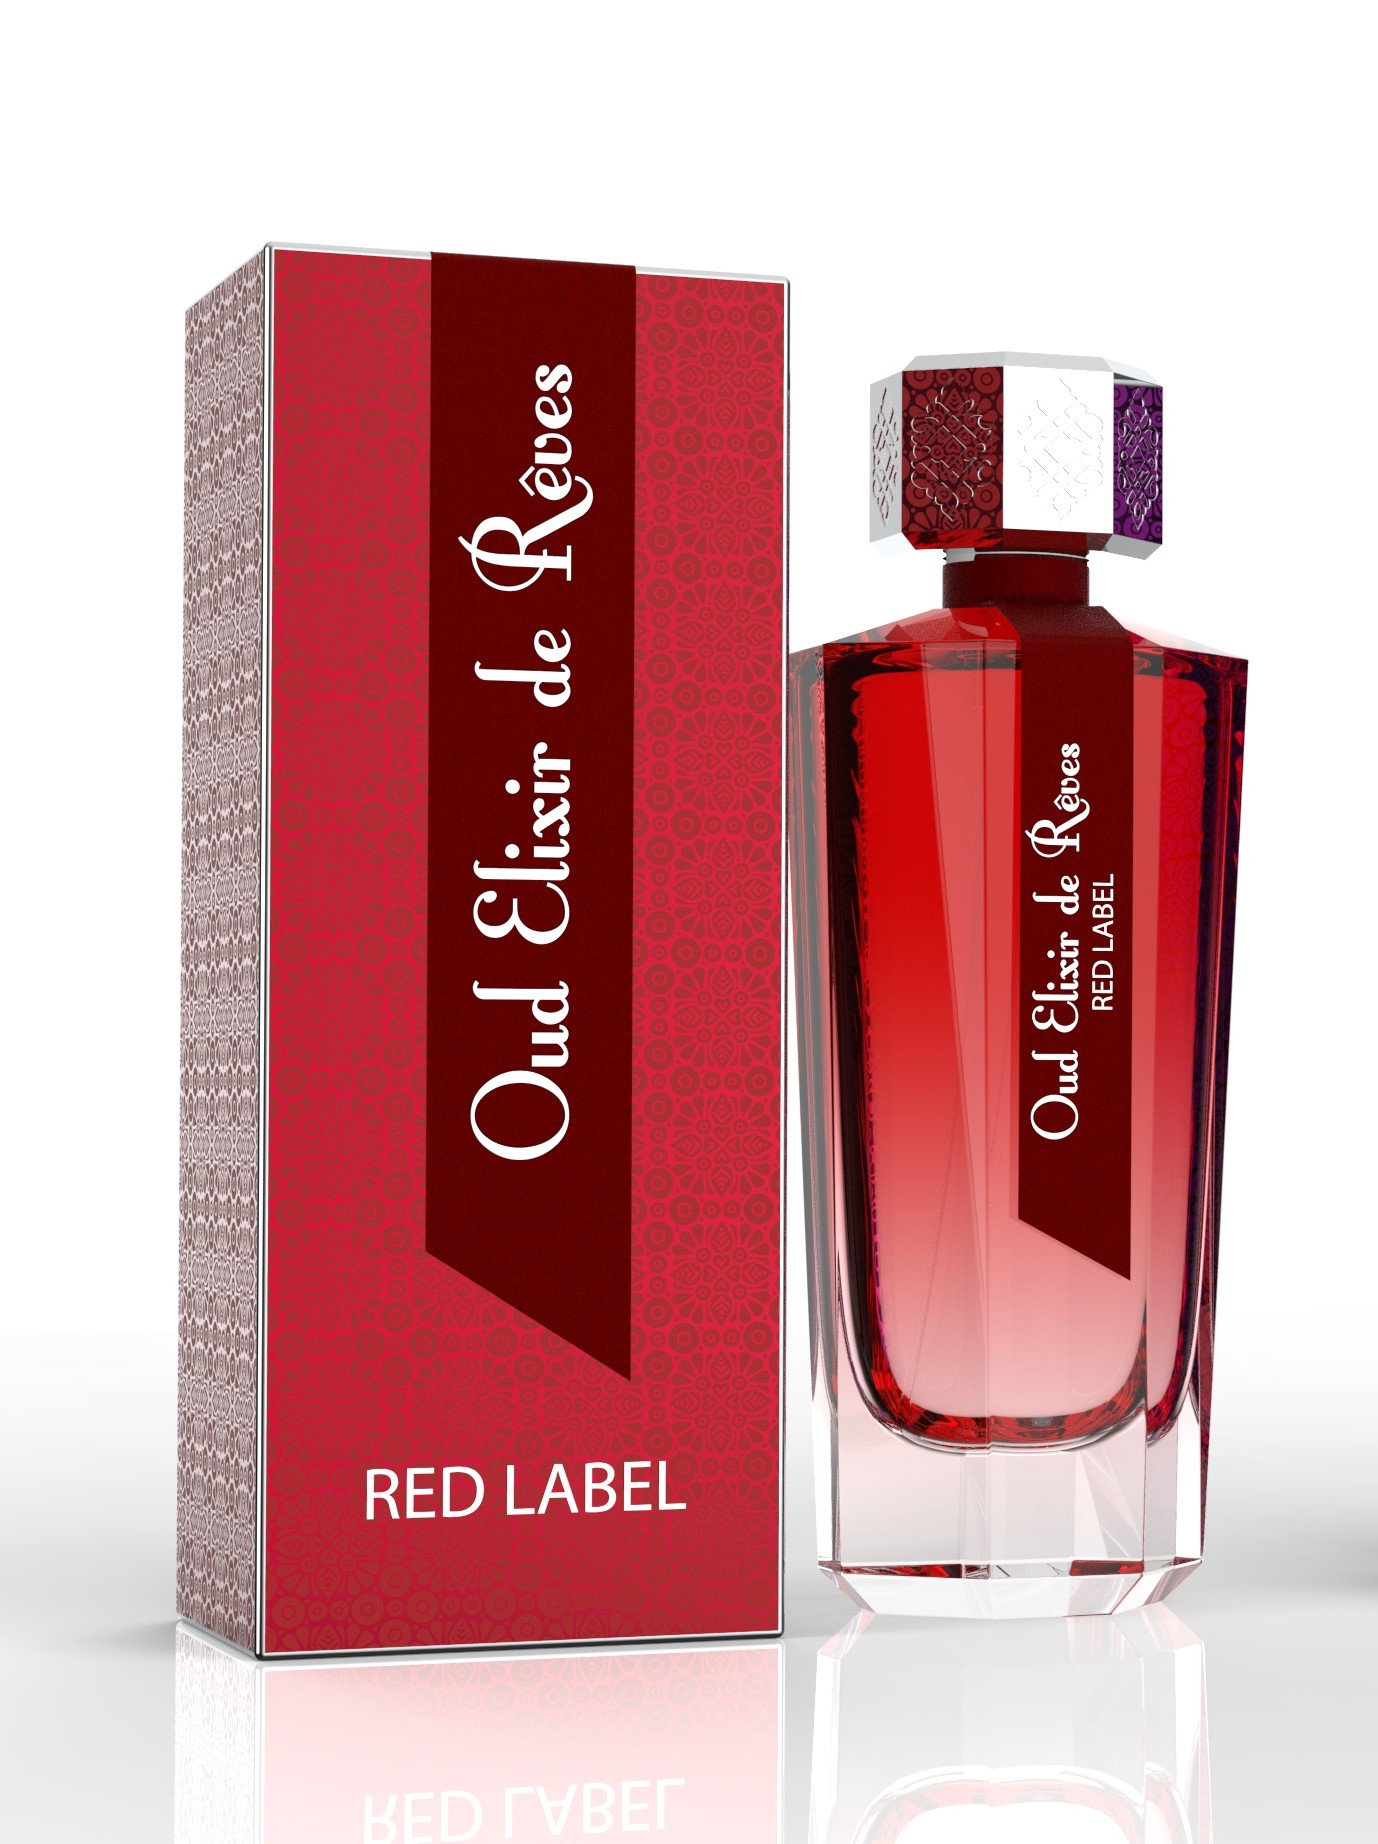 Featured image for “Oud Elixir d’Extase Red Label”